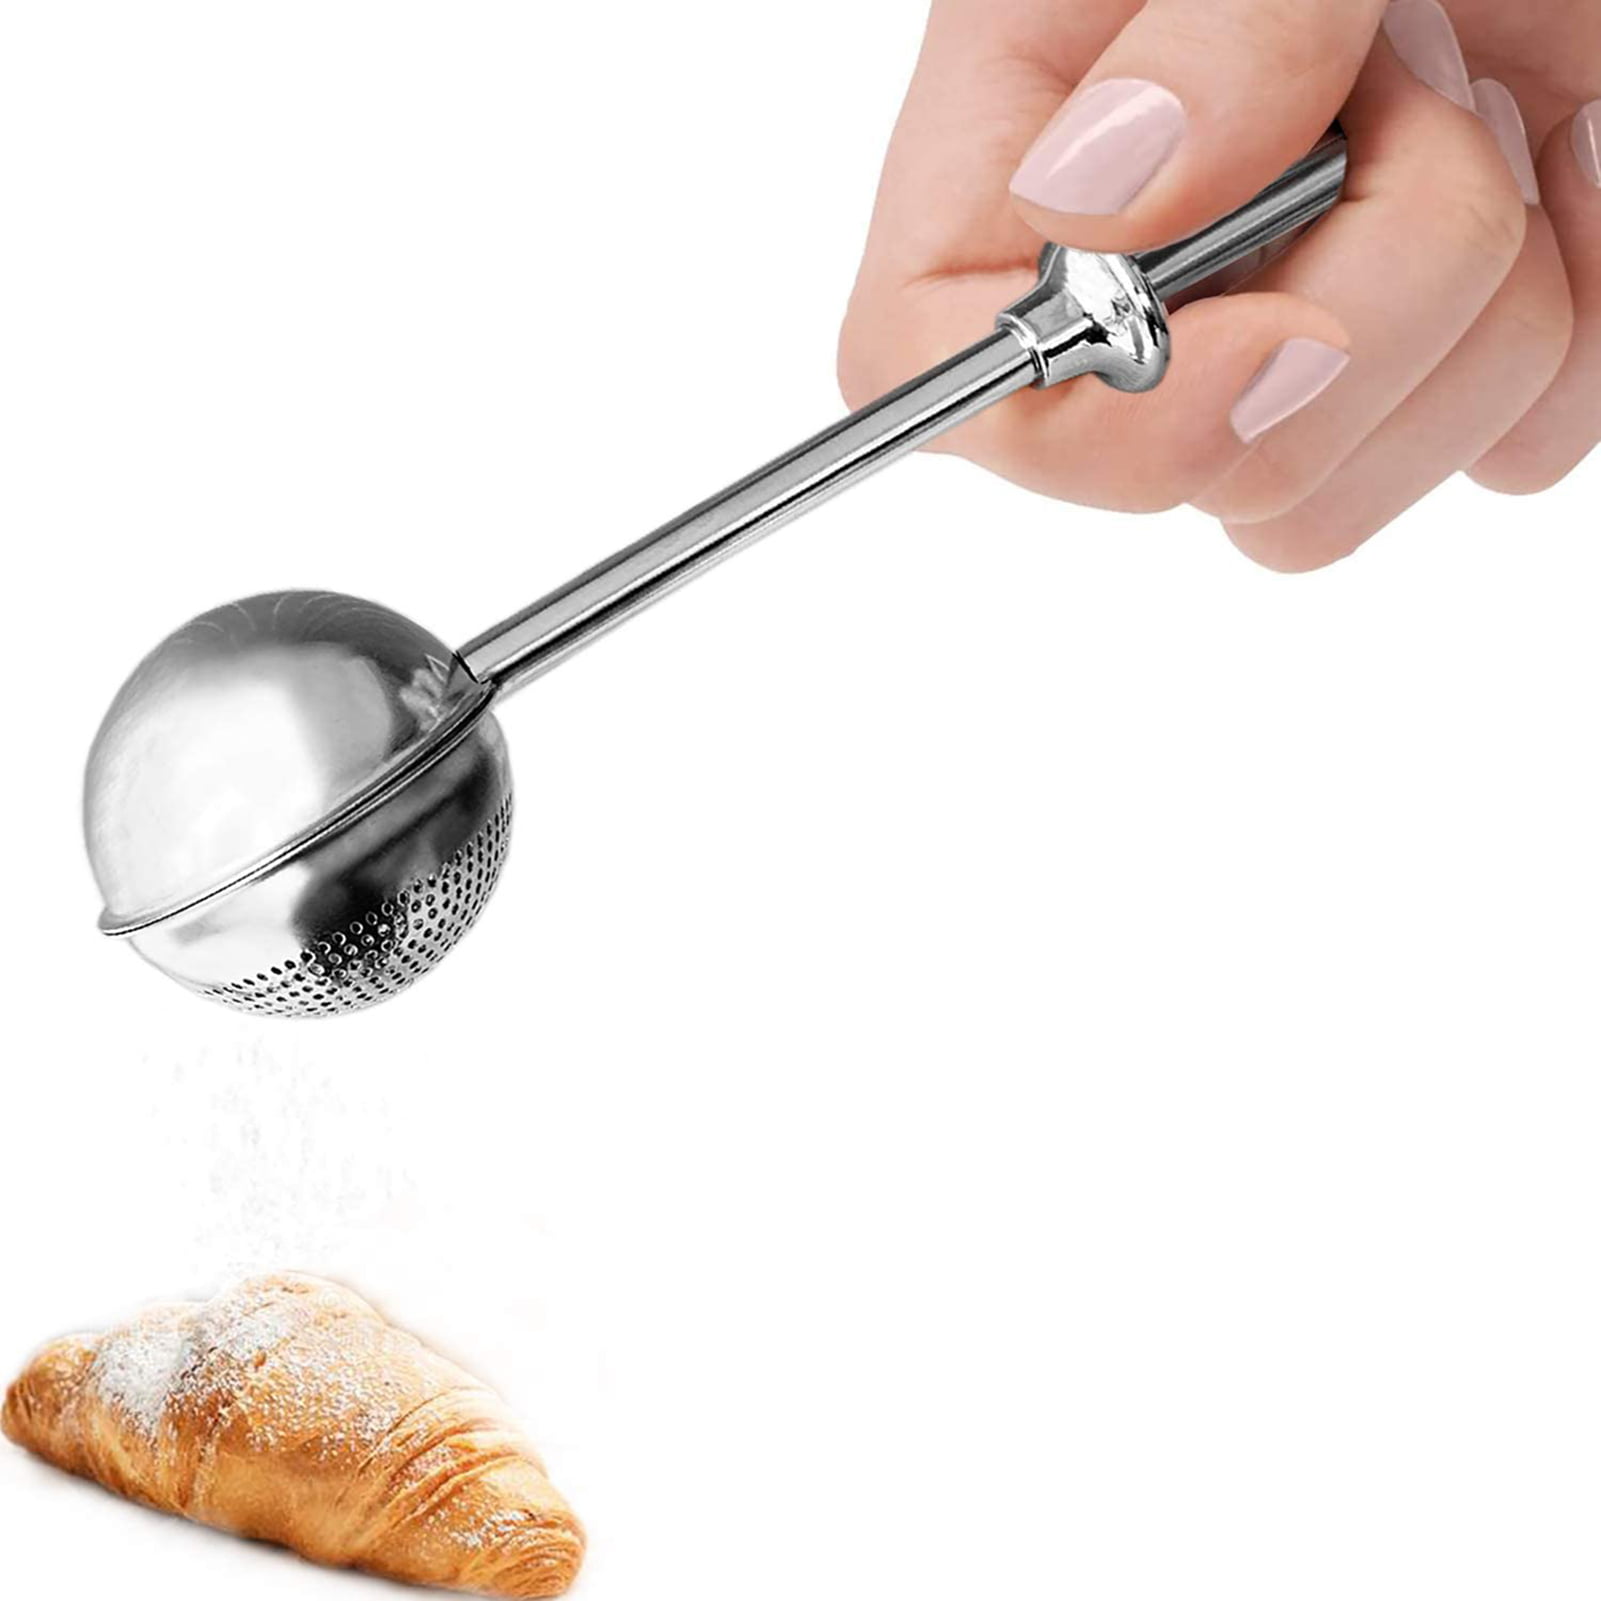 2Pack Bakers Dusting Wand for Sugar Flour and Spices Stainless Steel Powdered Sugar Shaker Duster Sifter 